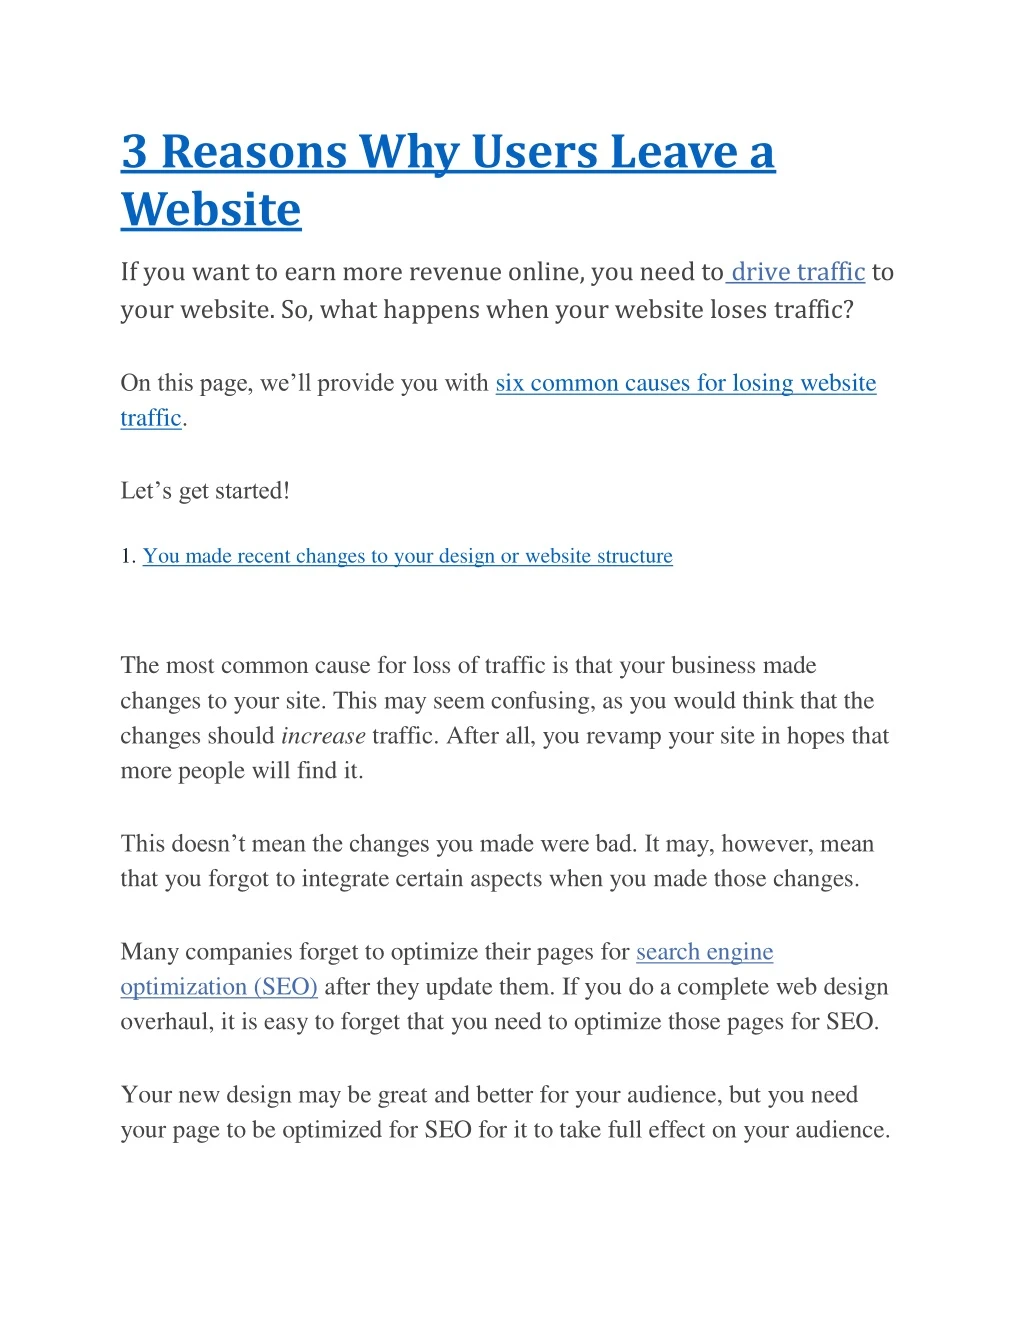 3 reasons why users leave a website